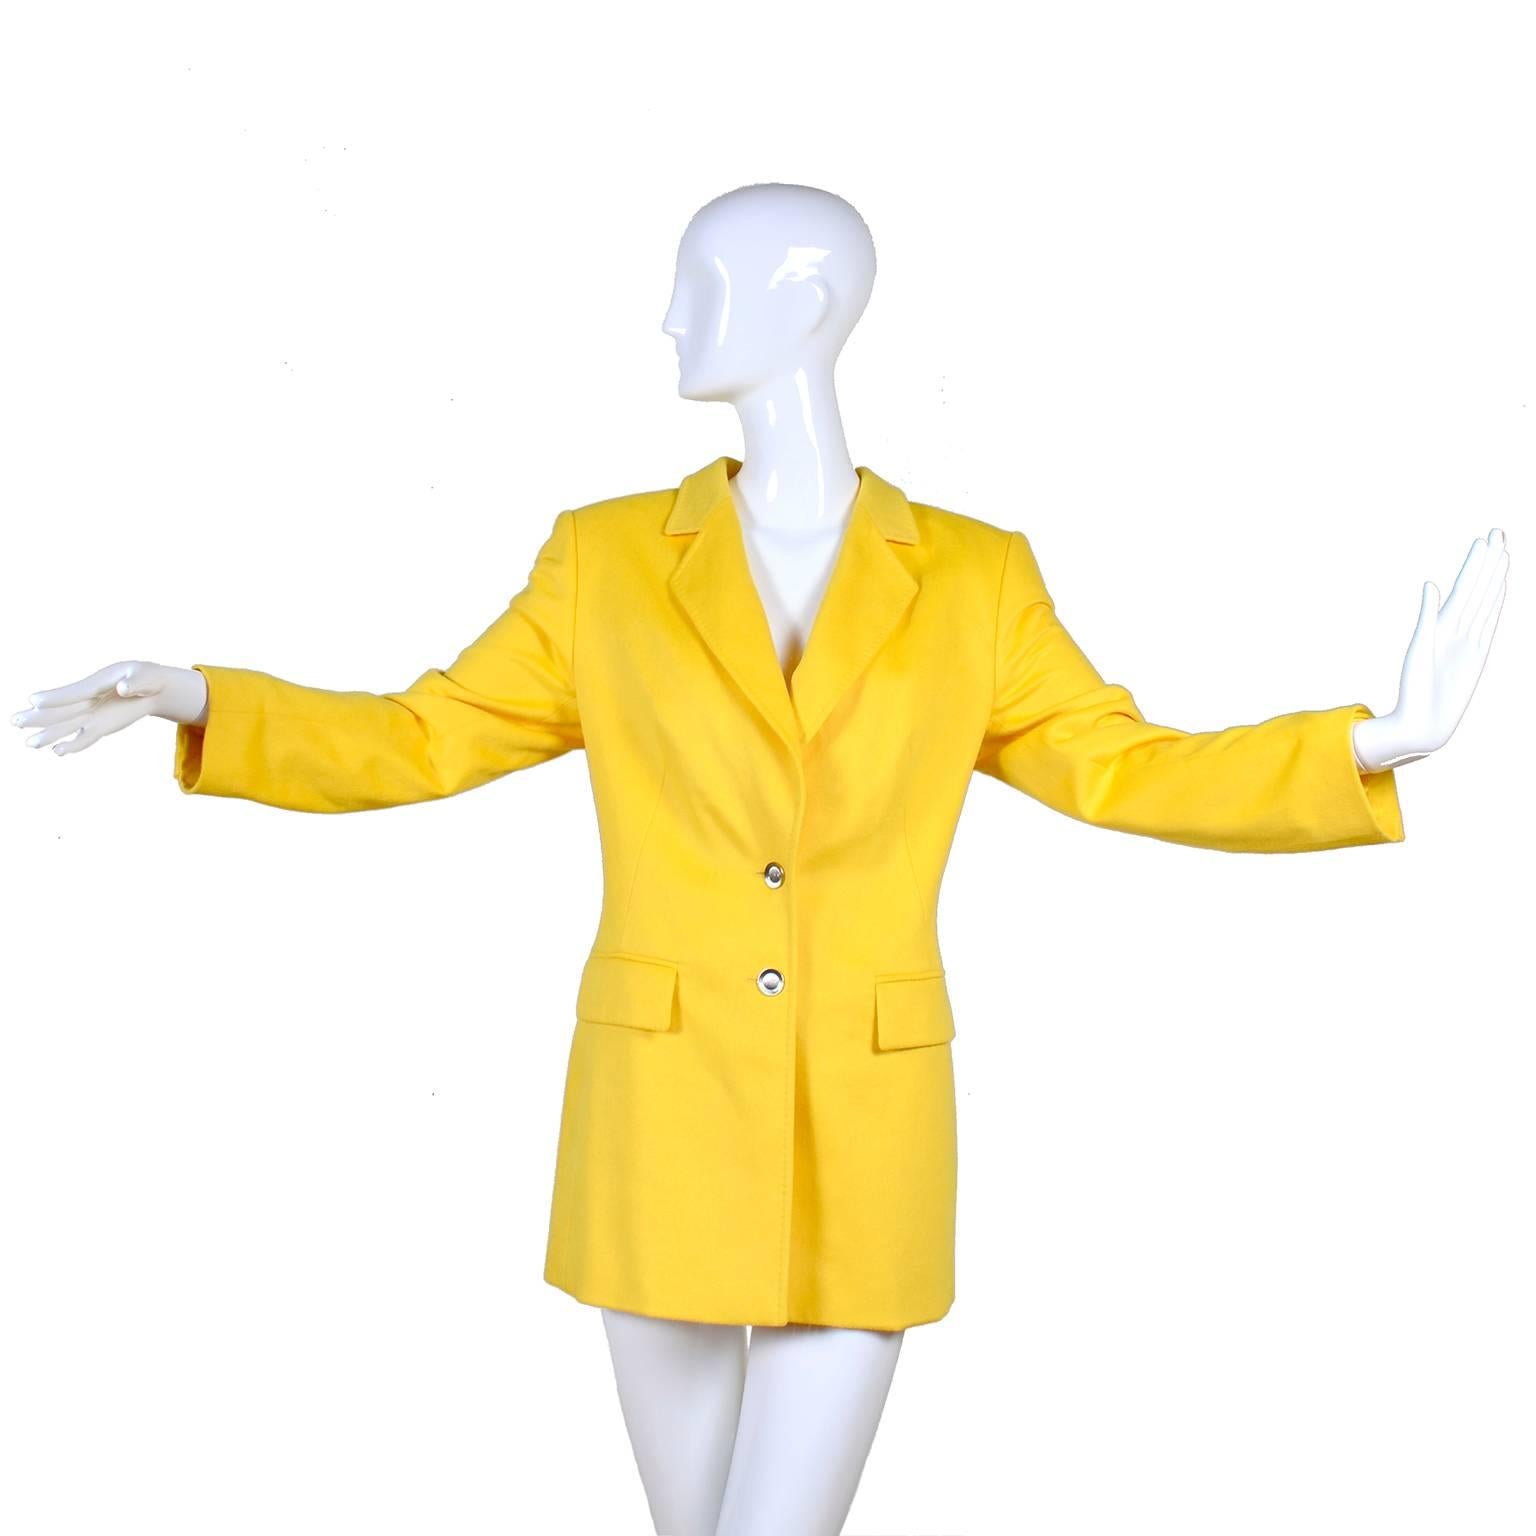 This beautiful early 1990s yellow Escada blazer still has its original tags and extra buttons attached.  The jacket was designed by Margaretha Ley and is 70% Rabbit and 30% new wool. The logo lining is rayon and there is aksi an inner label that